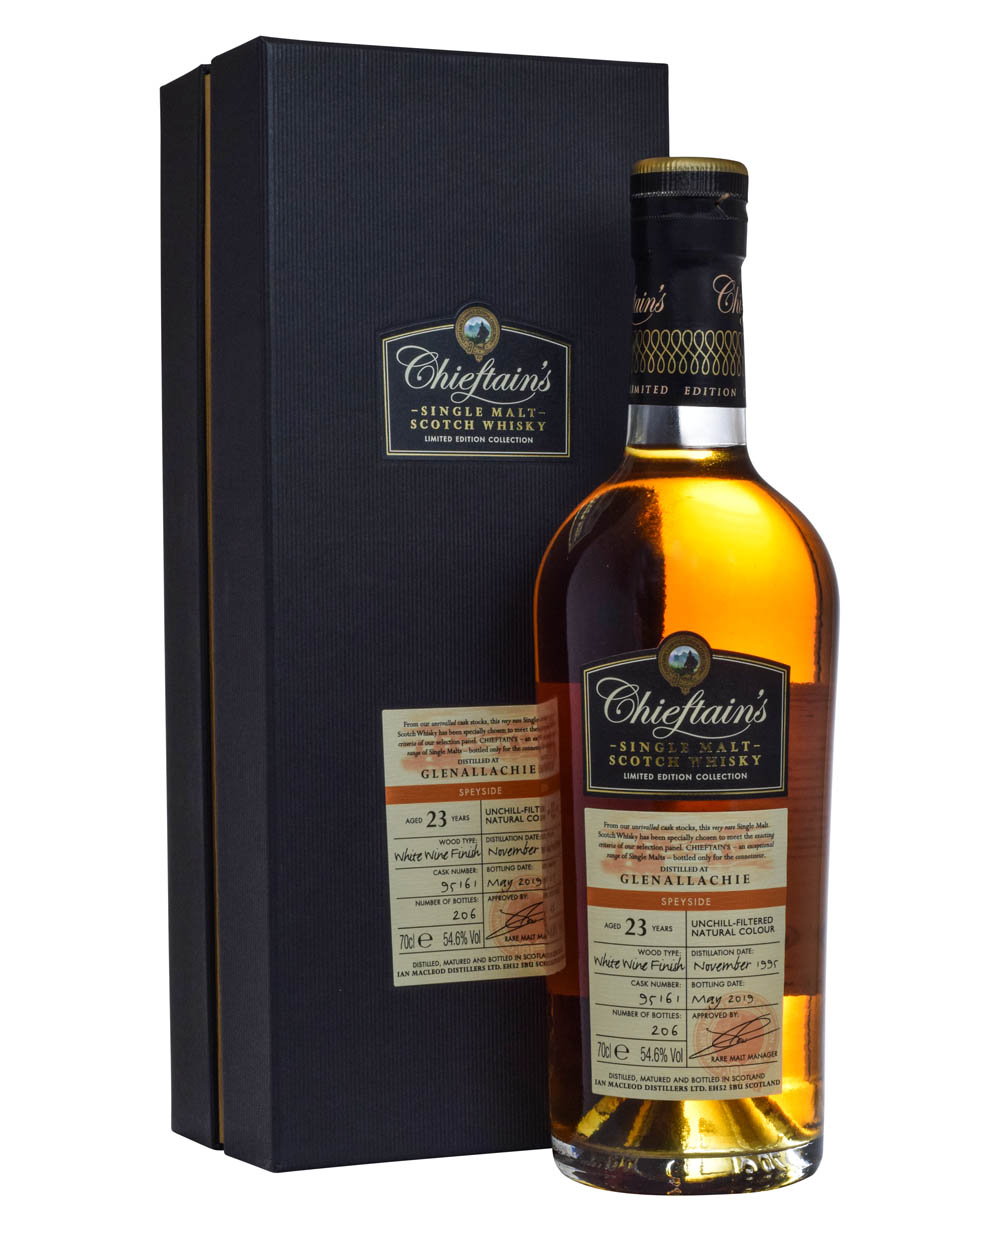 Glenallachie 23 Years Old Chieftain's 1995 Box Musthave Malts MHM